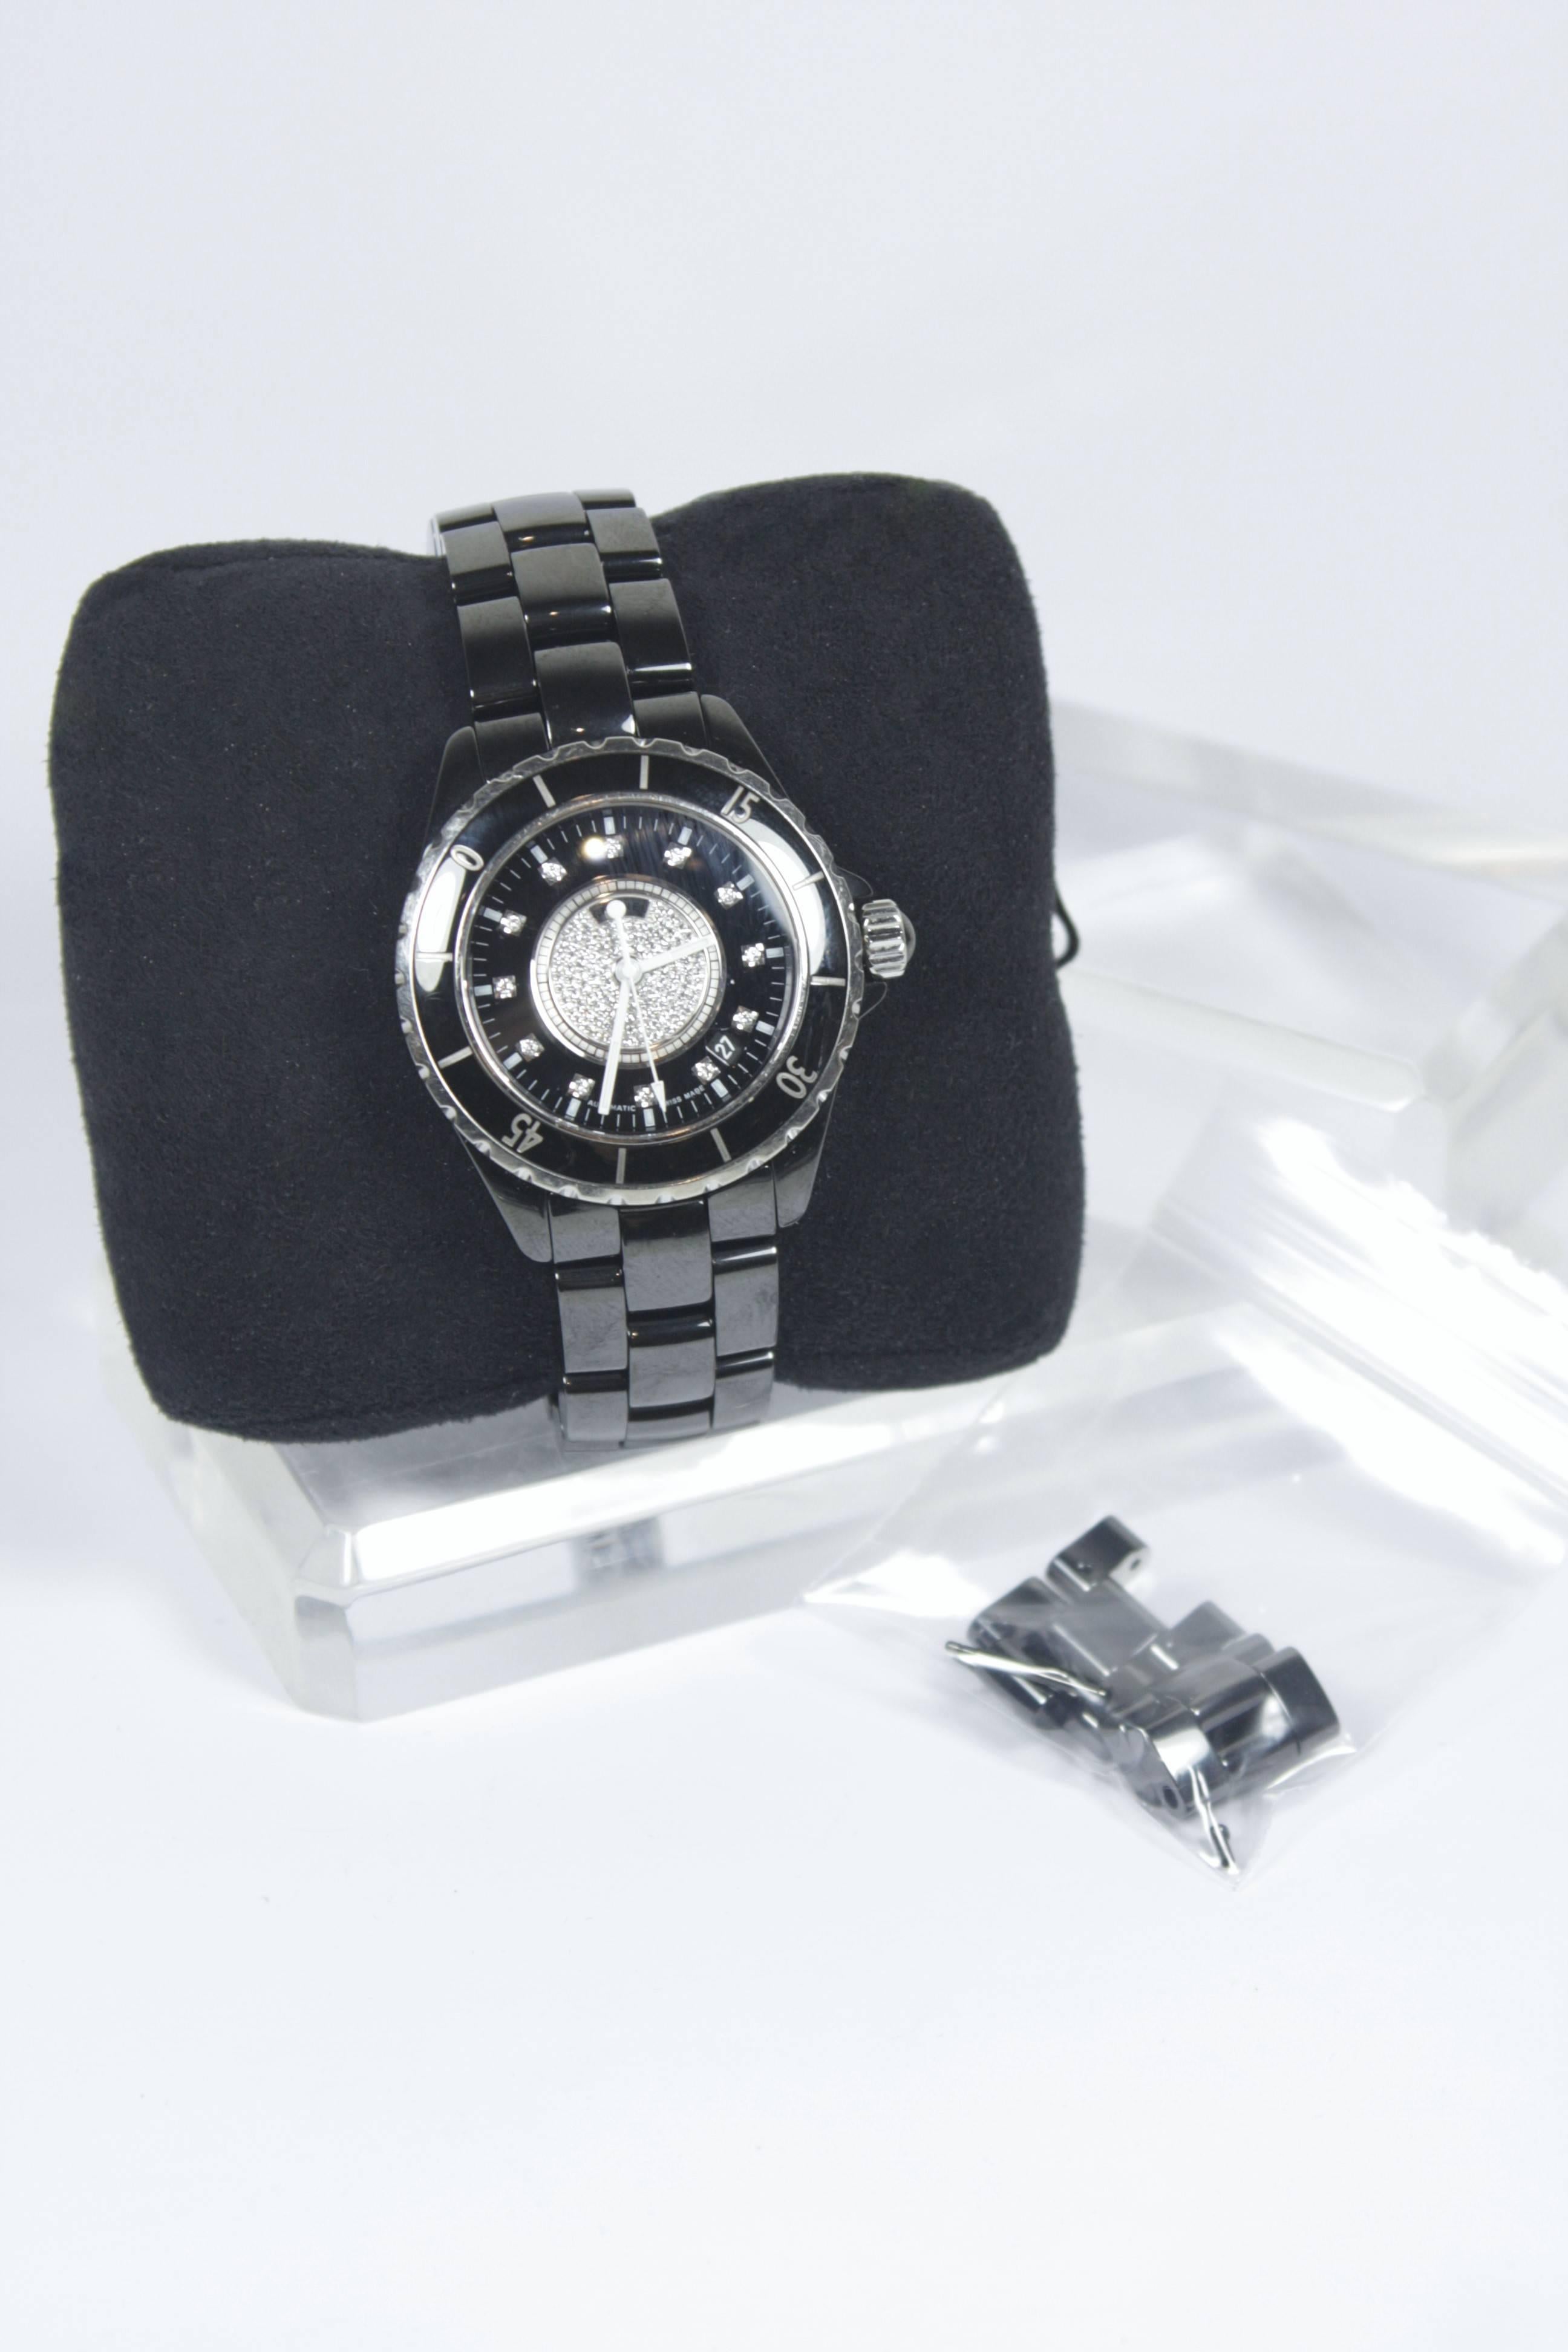 CHANEL Automatic J12 39mm Black Ceramic Watch with Diamond Pave Face   2